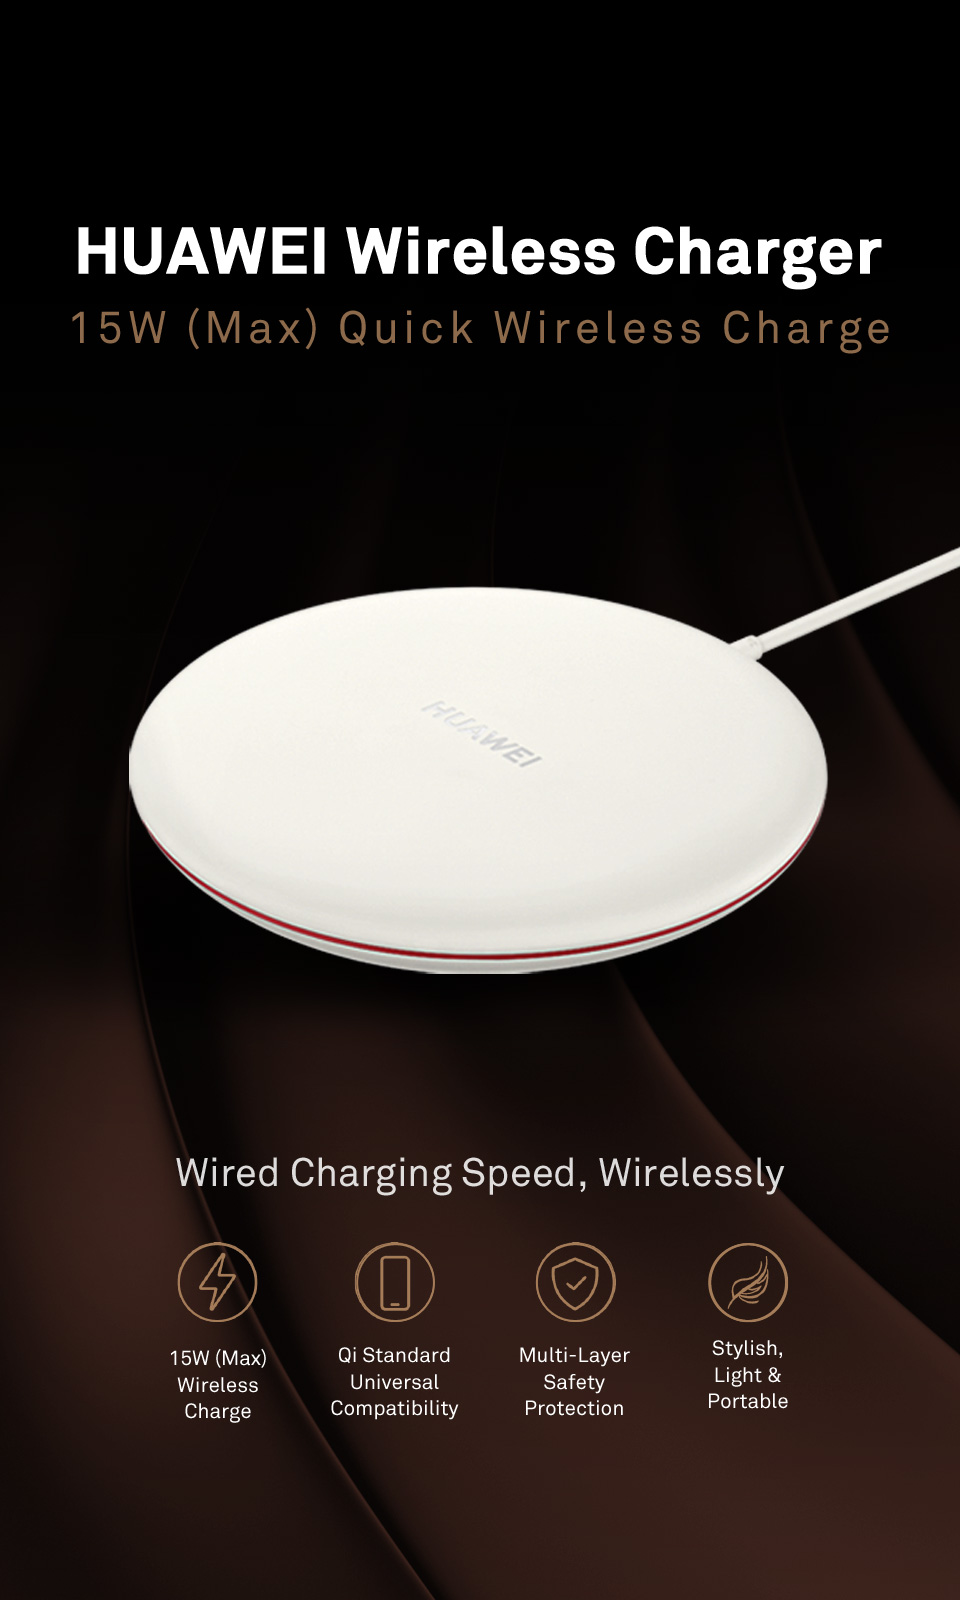 perrito Descriptivo Felicidades HUAWEI Wireless Charger, Qi standard, universal wireless charger I HUAWEI  SPAIN